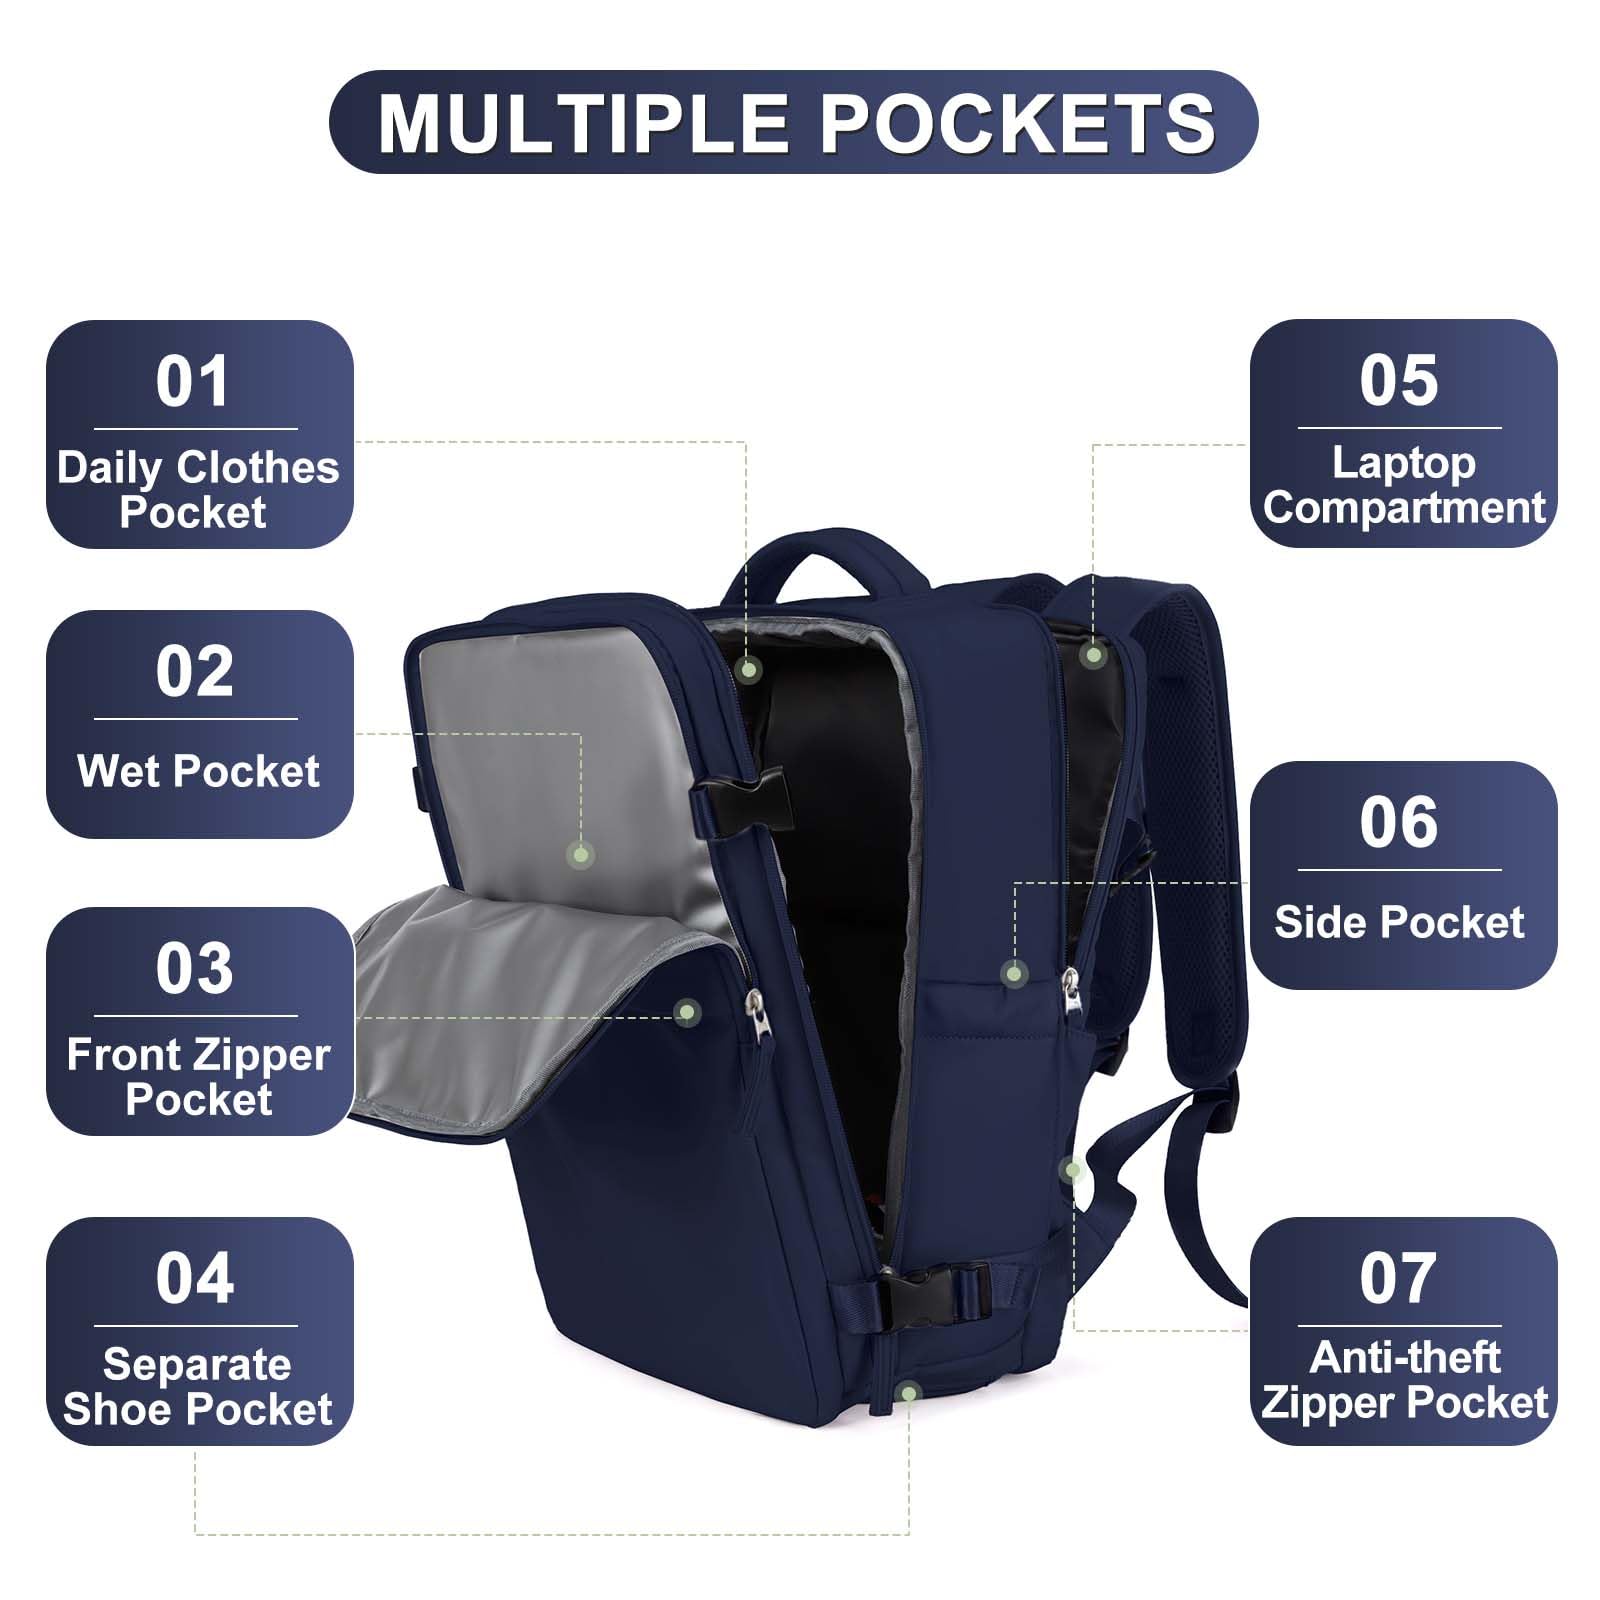 Laptop Travel Backpack For Women Men Airline Approved Carry On Bags For Airplanes Underseat Luggage Backpack For Traveling On Airplane Personal Item Travel Bag For Airlines Travel Essentials Navy Blue